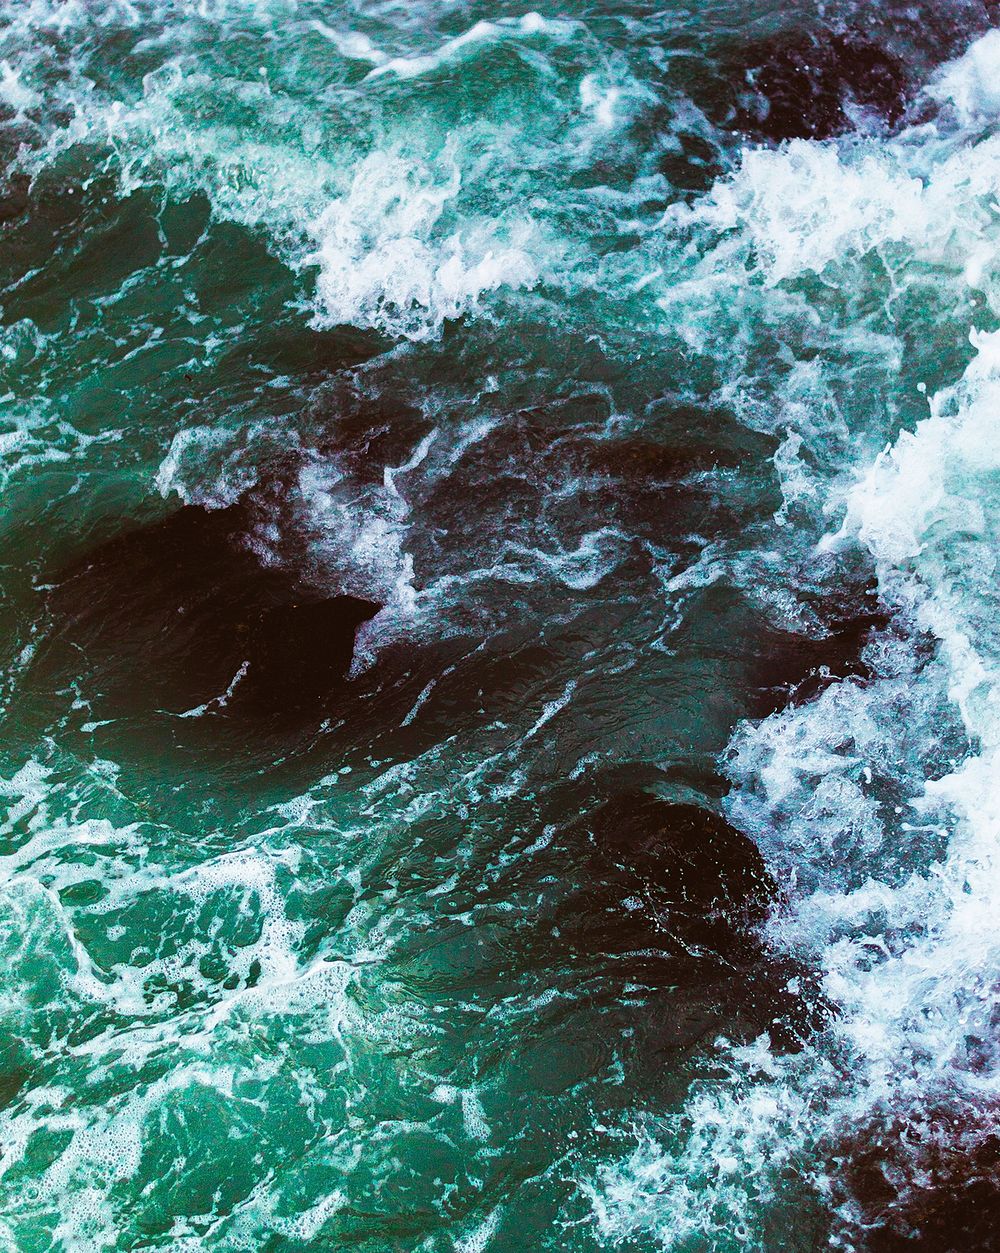 Aesthetic ocean wave background, nature photo